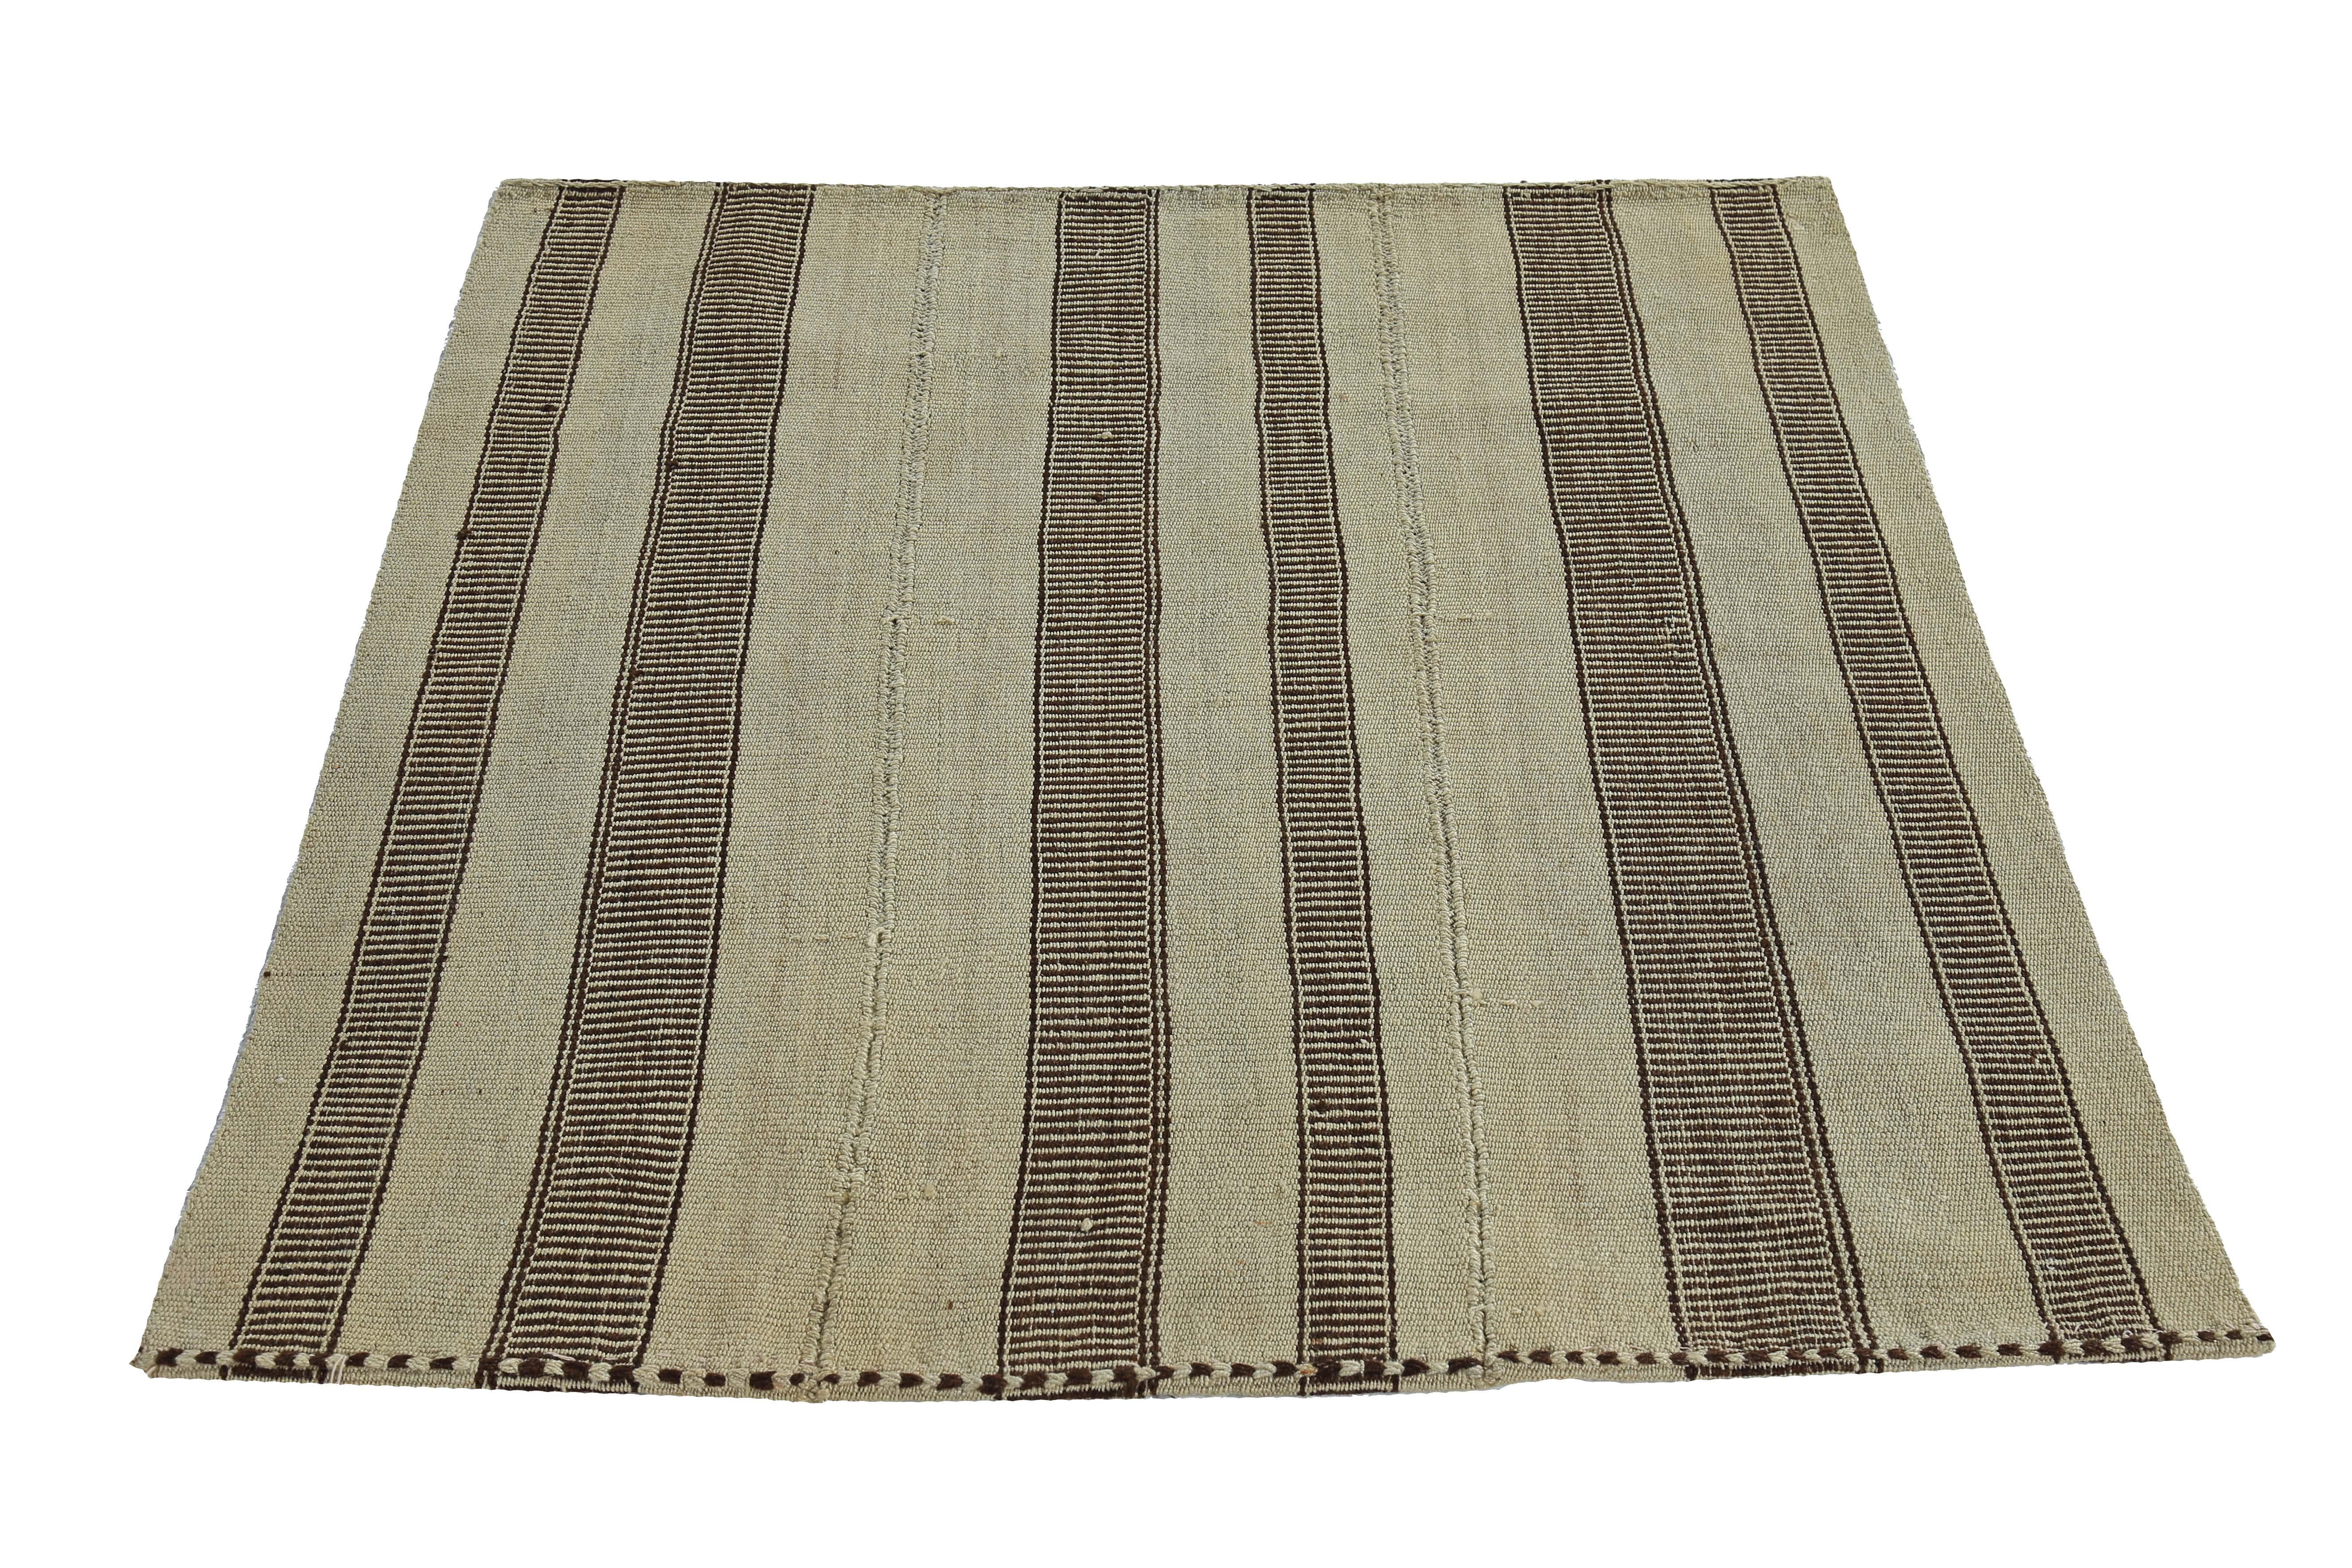 Turkish rug handwoven from the finest sheep’s wool and colored with all-natural vegetable dyes that are safe for humans and pets. It’s a traditional Kilim flat-weave design featuring brown stripes on a beige field. It’s a stunning piece to get for